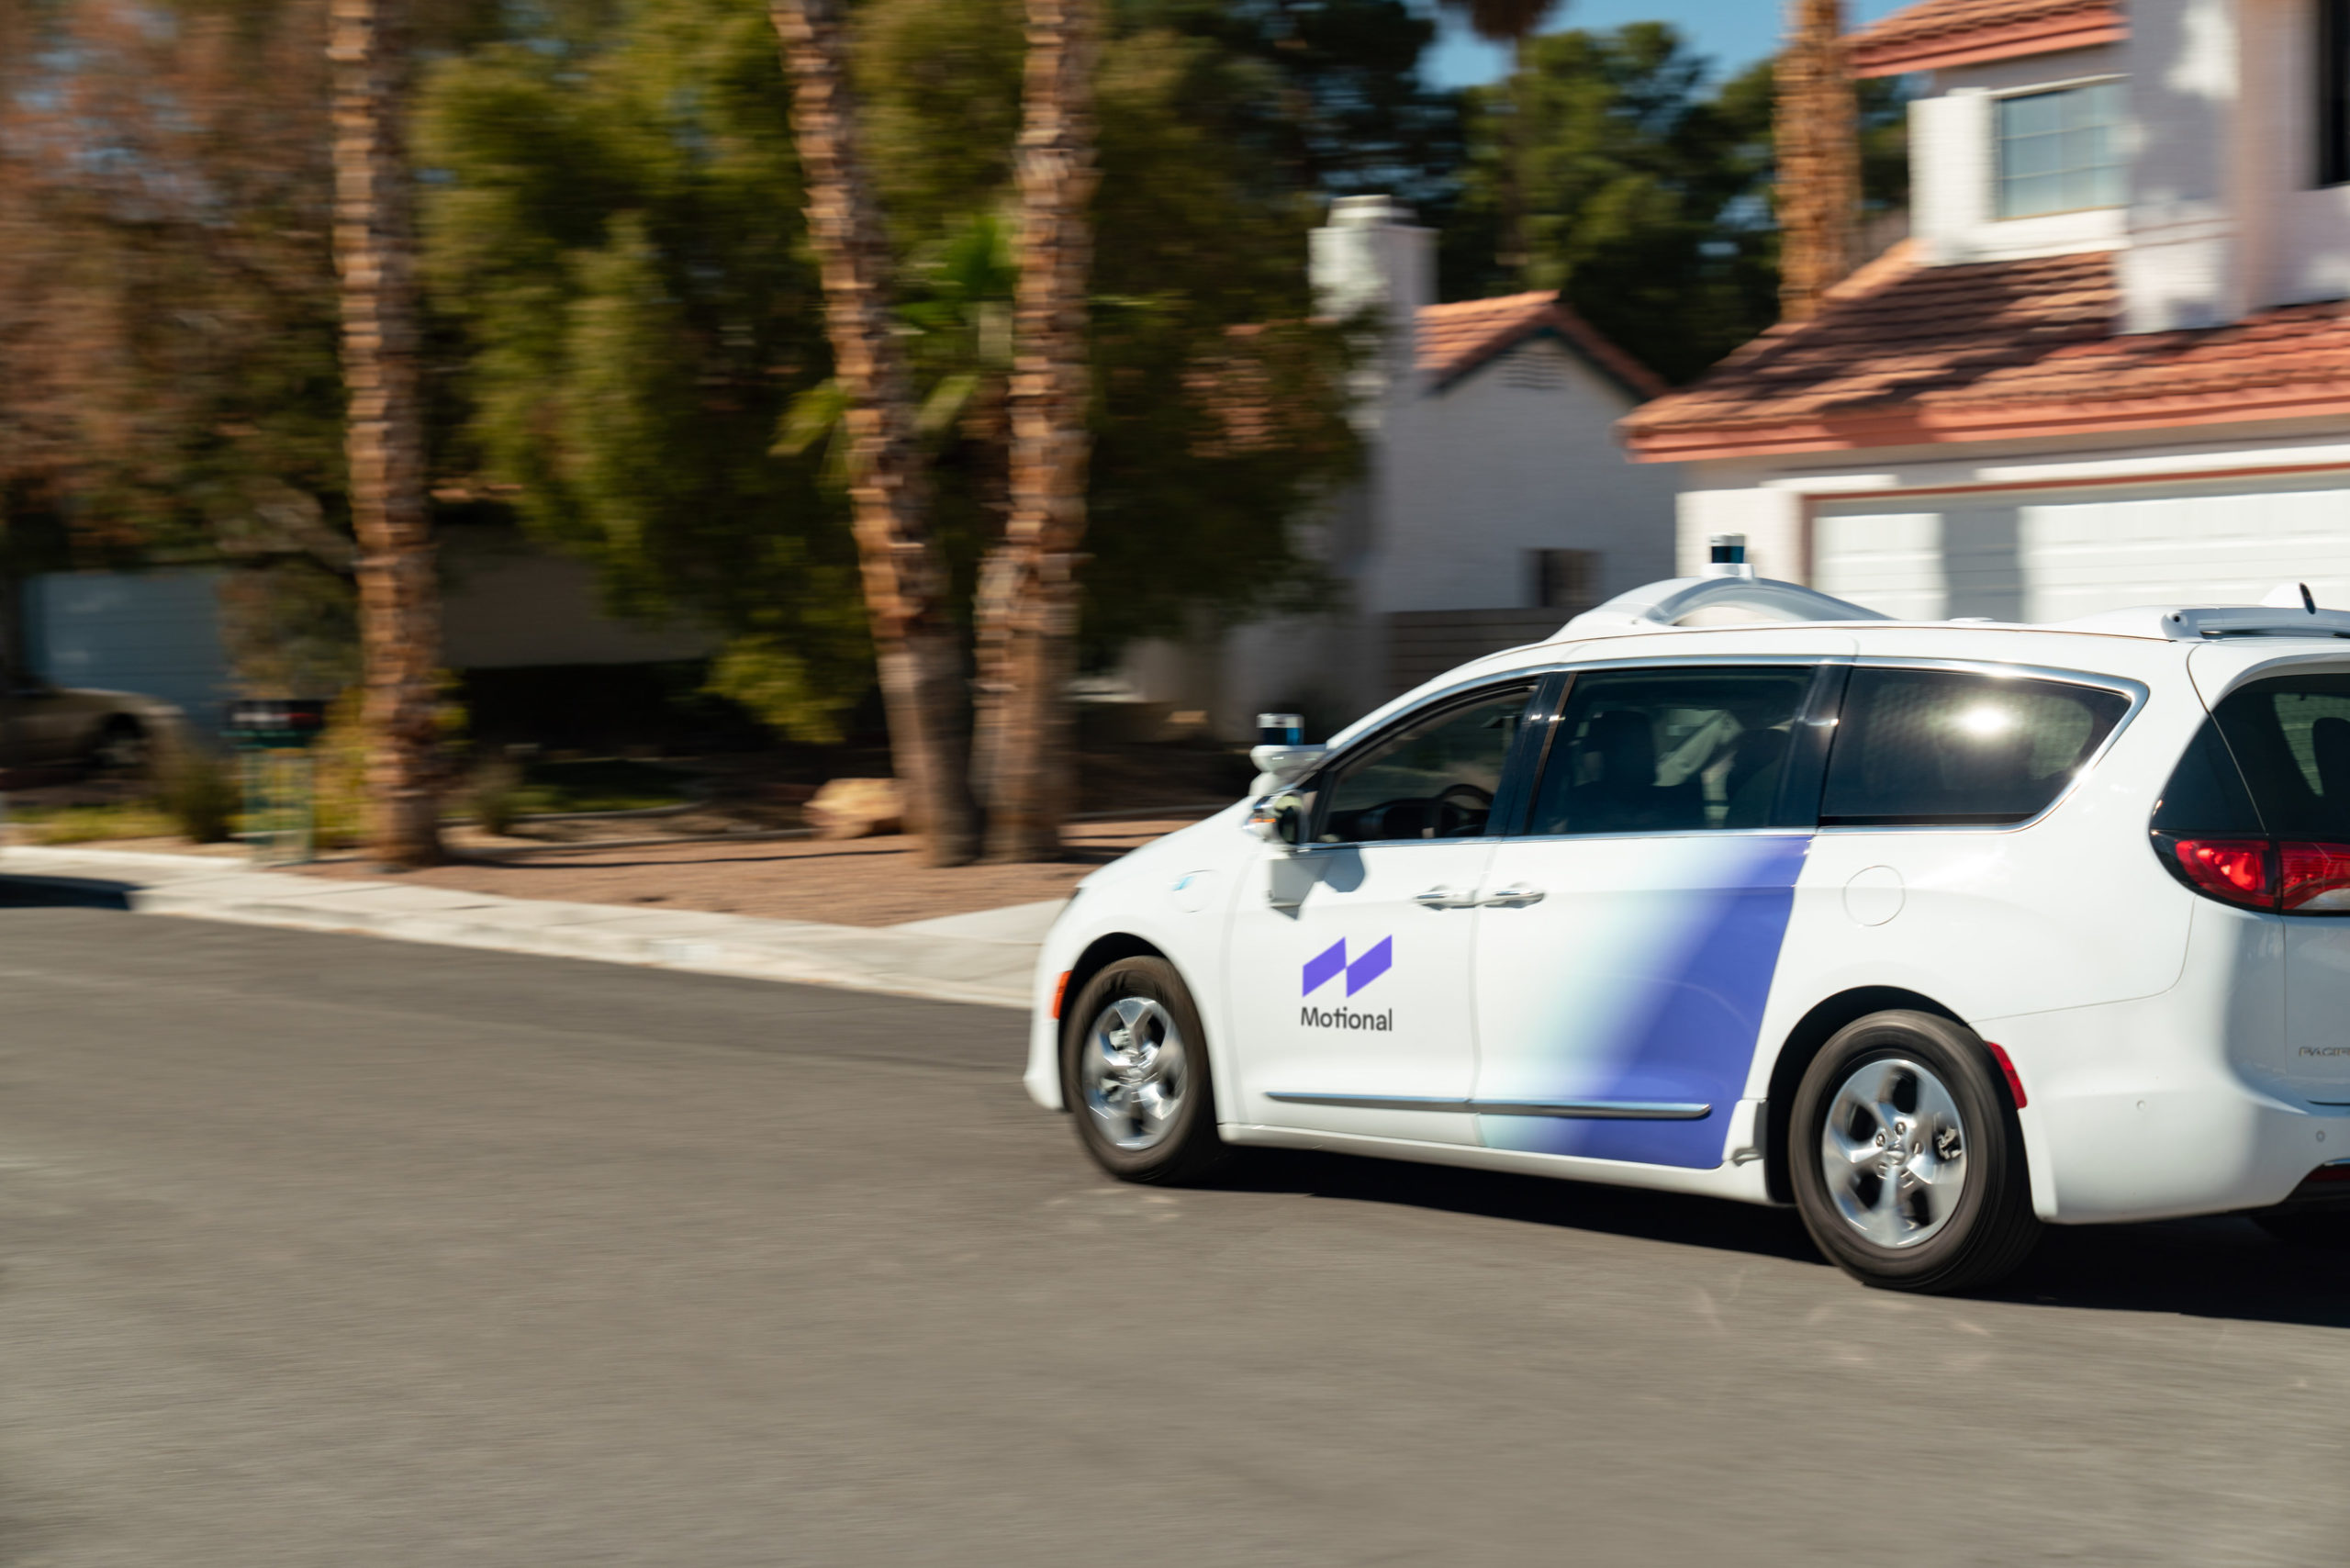 Motional Operates Driverless Vehicles with Empty Driver's Seat | THE SHOP